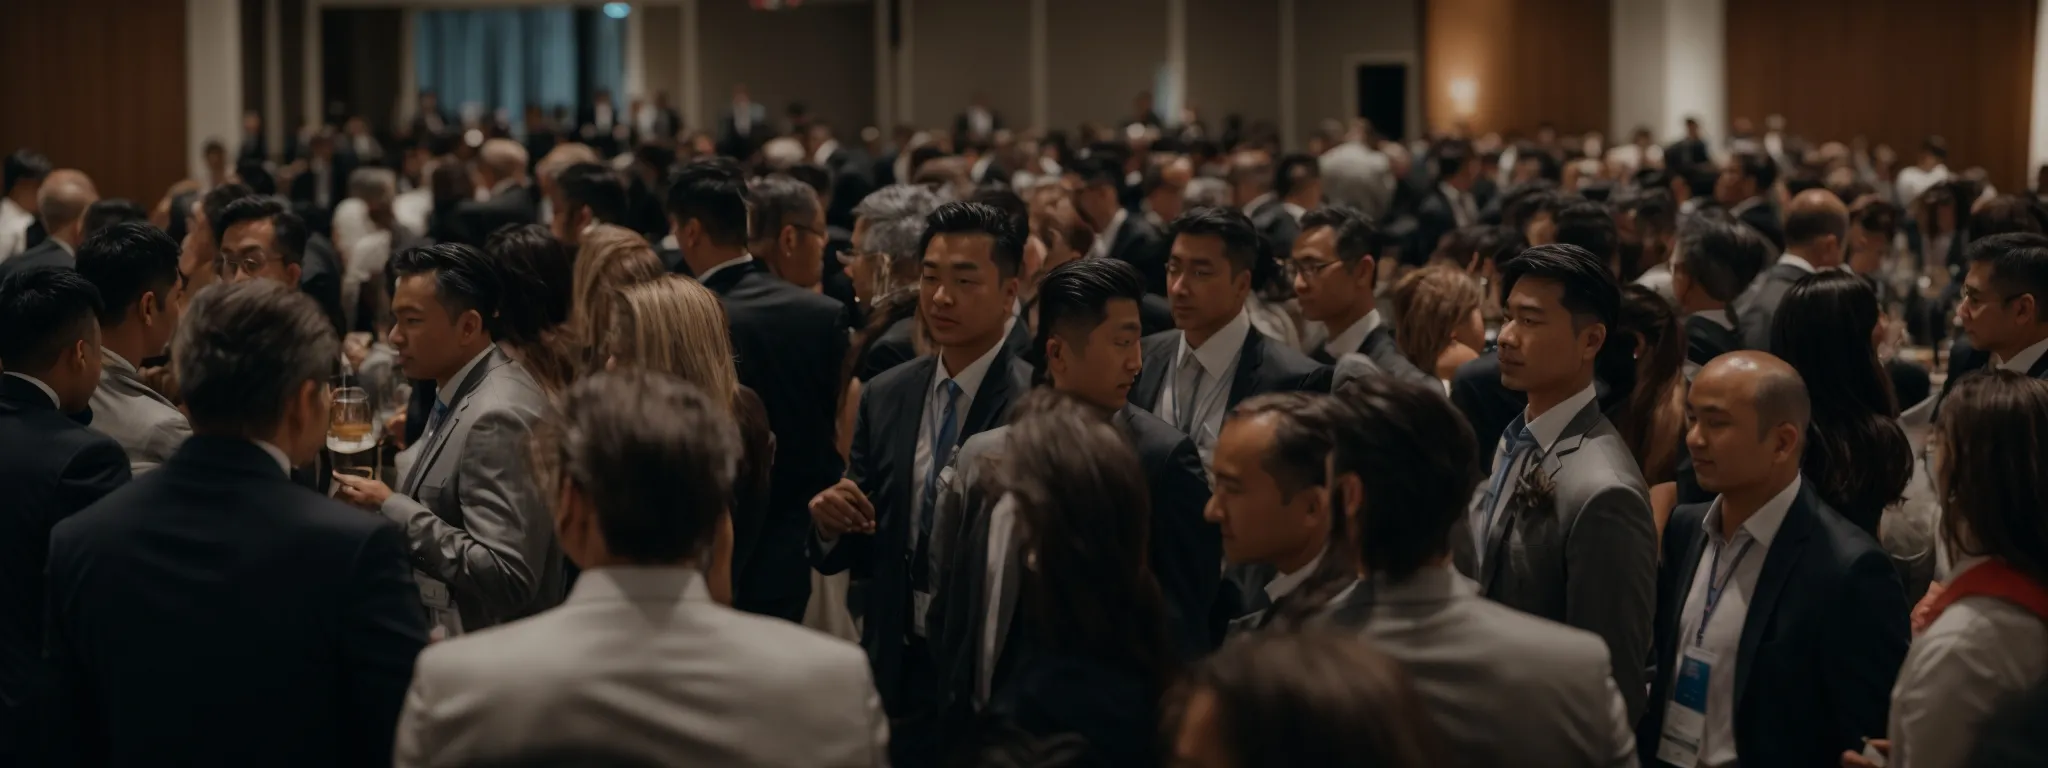 a room full of professionals networking at a business conference.